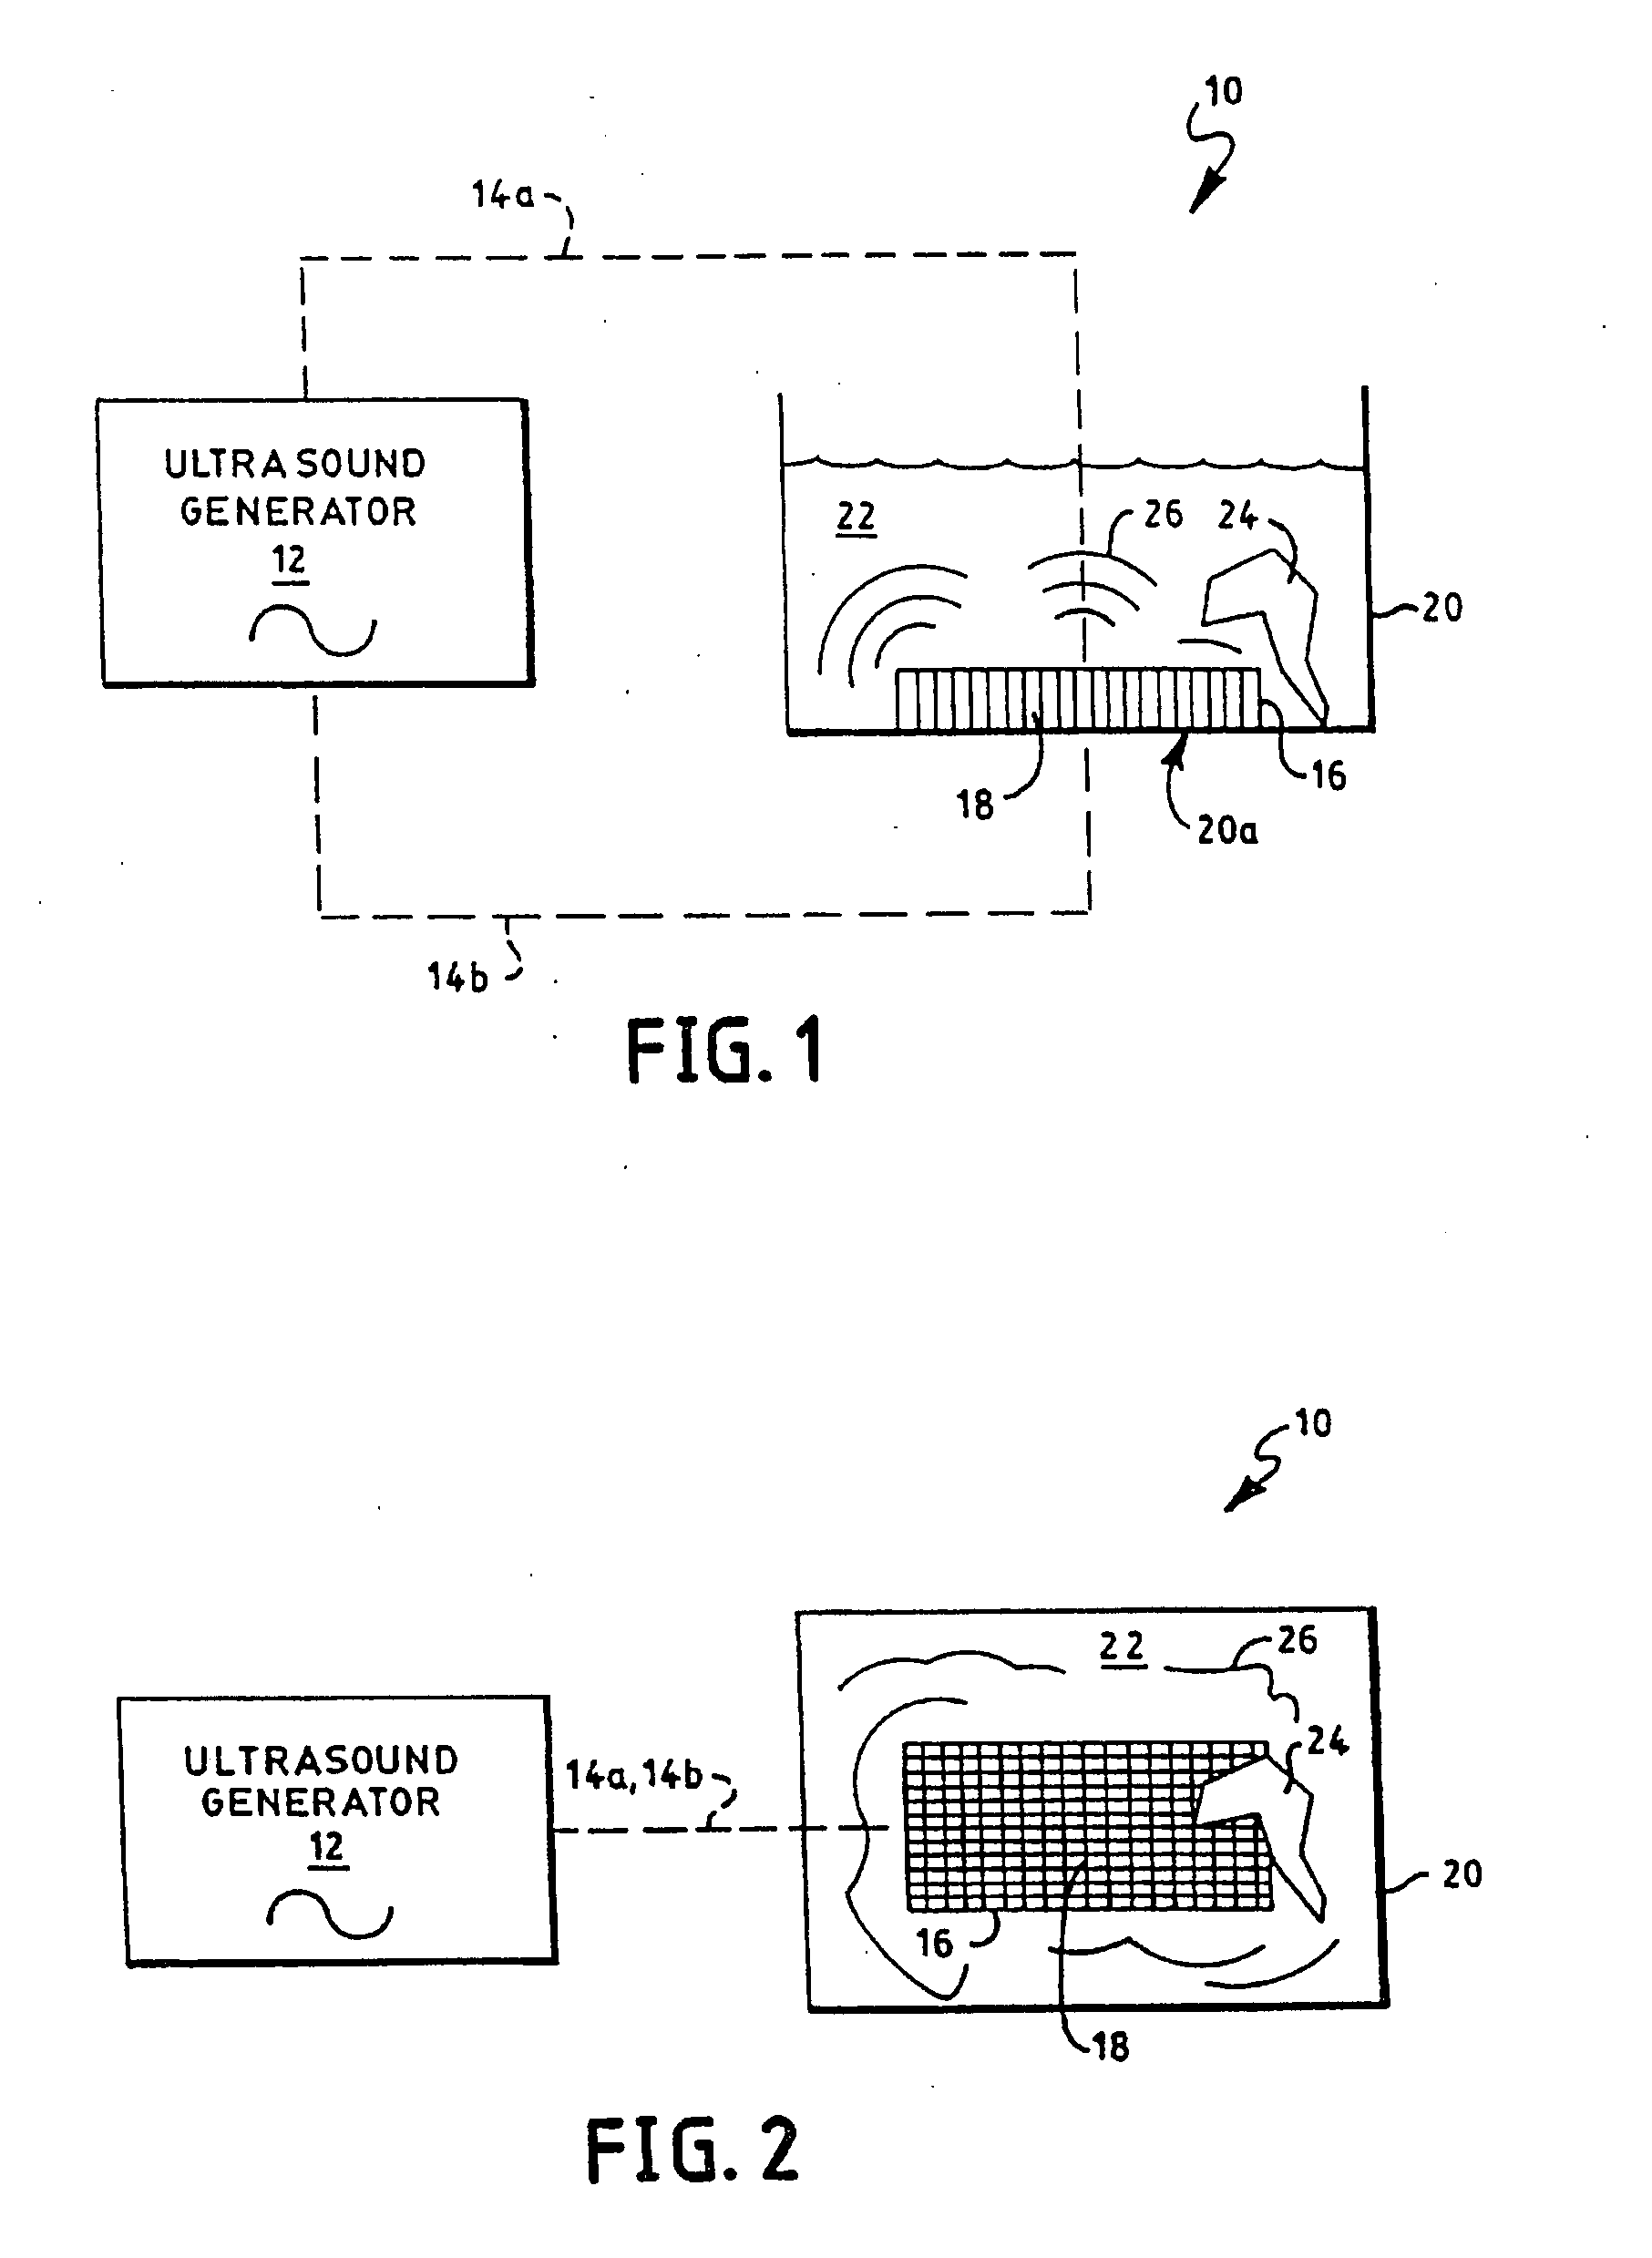 Megasonic apparatus, circuitry, signals and methods for cleaning and/or processing